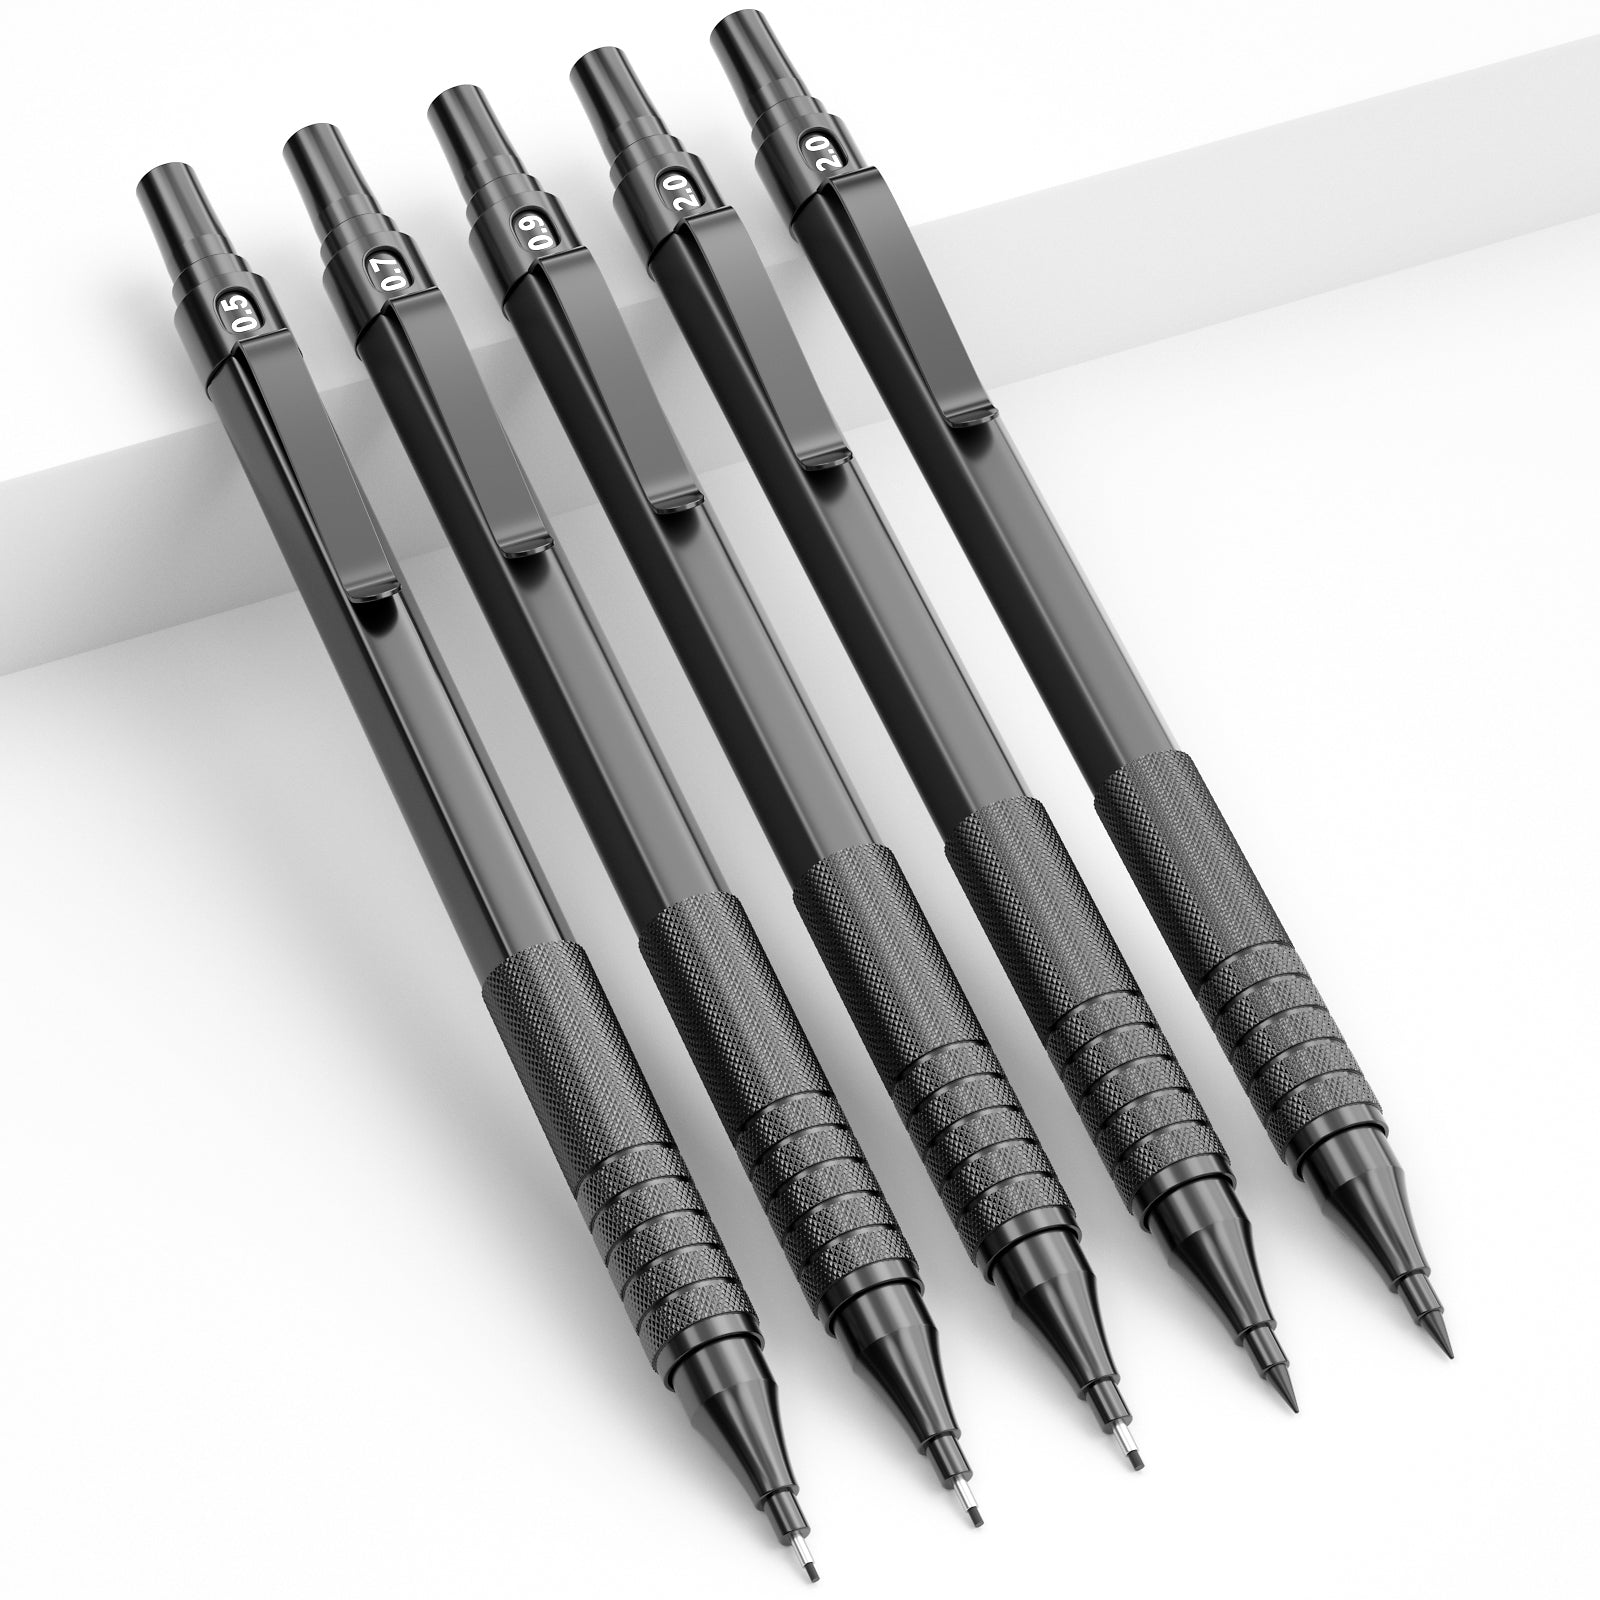 Nicpro 22PCS Metal Mechanical Pencils Set in Case, Art Drafting Pencil 0.5,  0.7, 0.9 mm & 2 PCS 2mm Graphite Lead Holder(4B 2B HB 2H) for Drawing